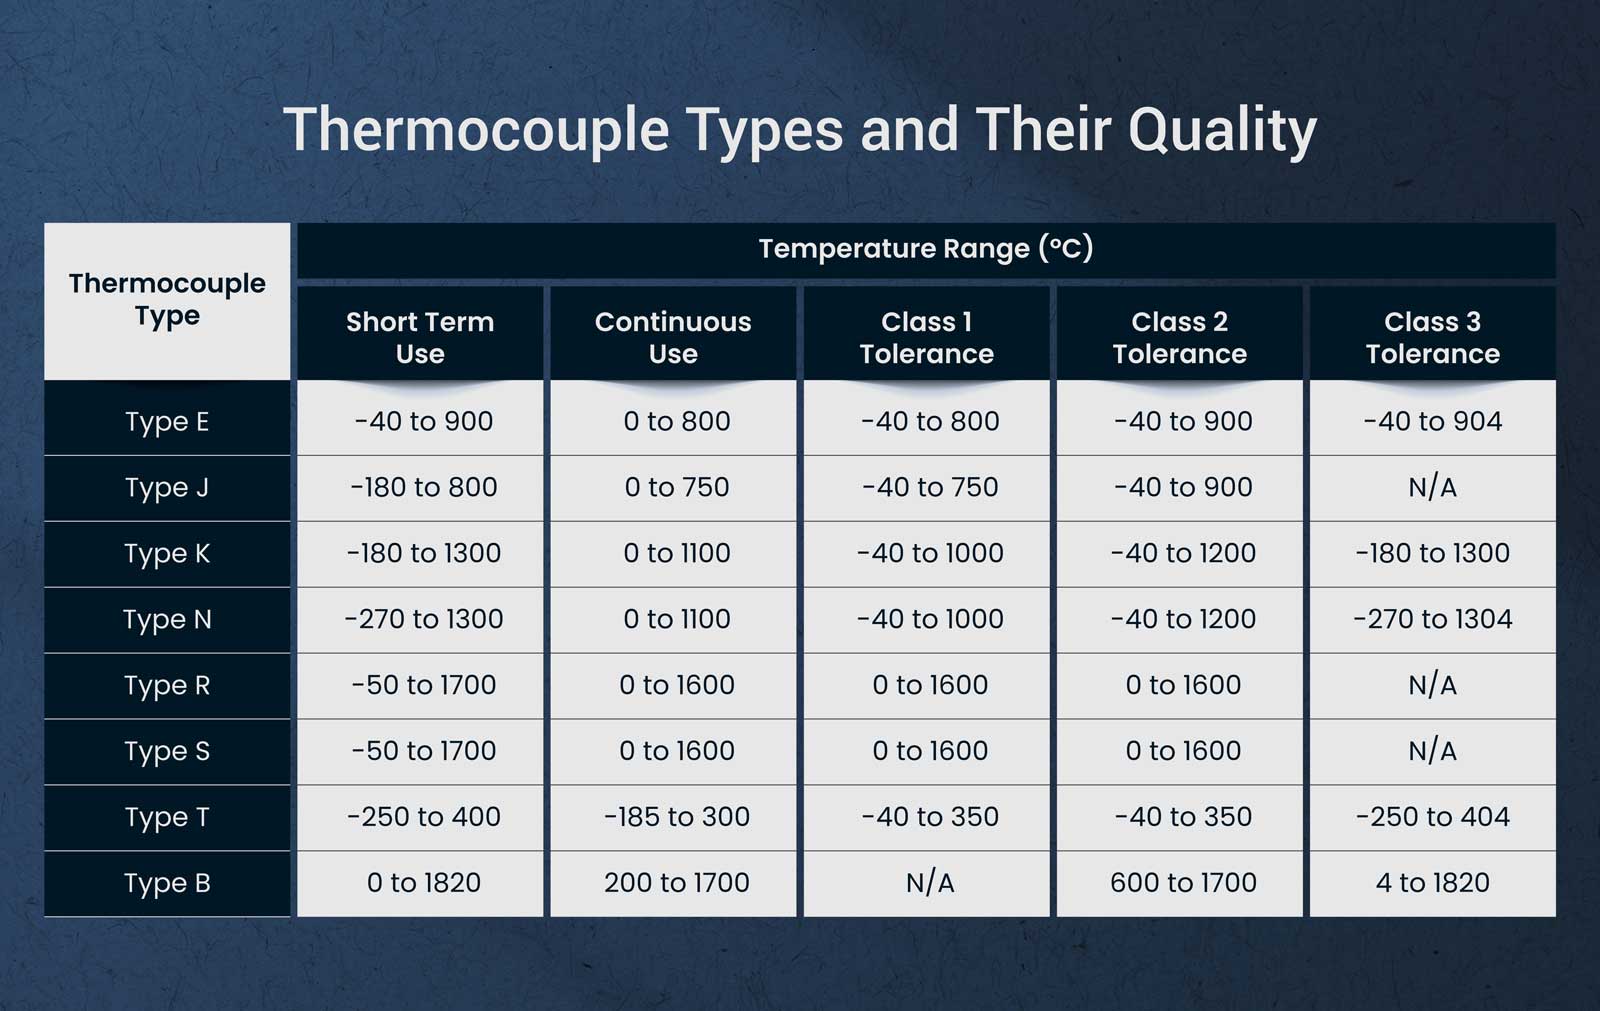 Table C: Thermocouple Types and Their Quality (source)